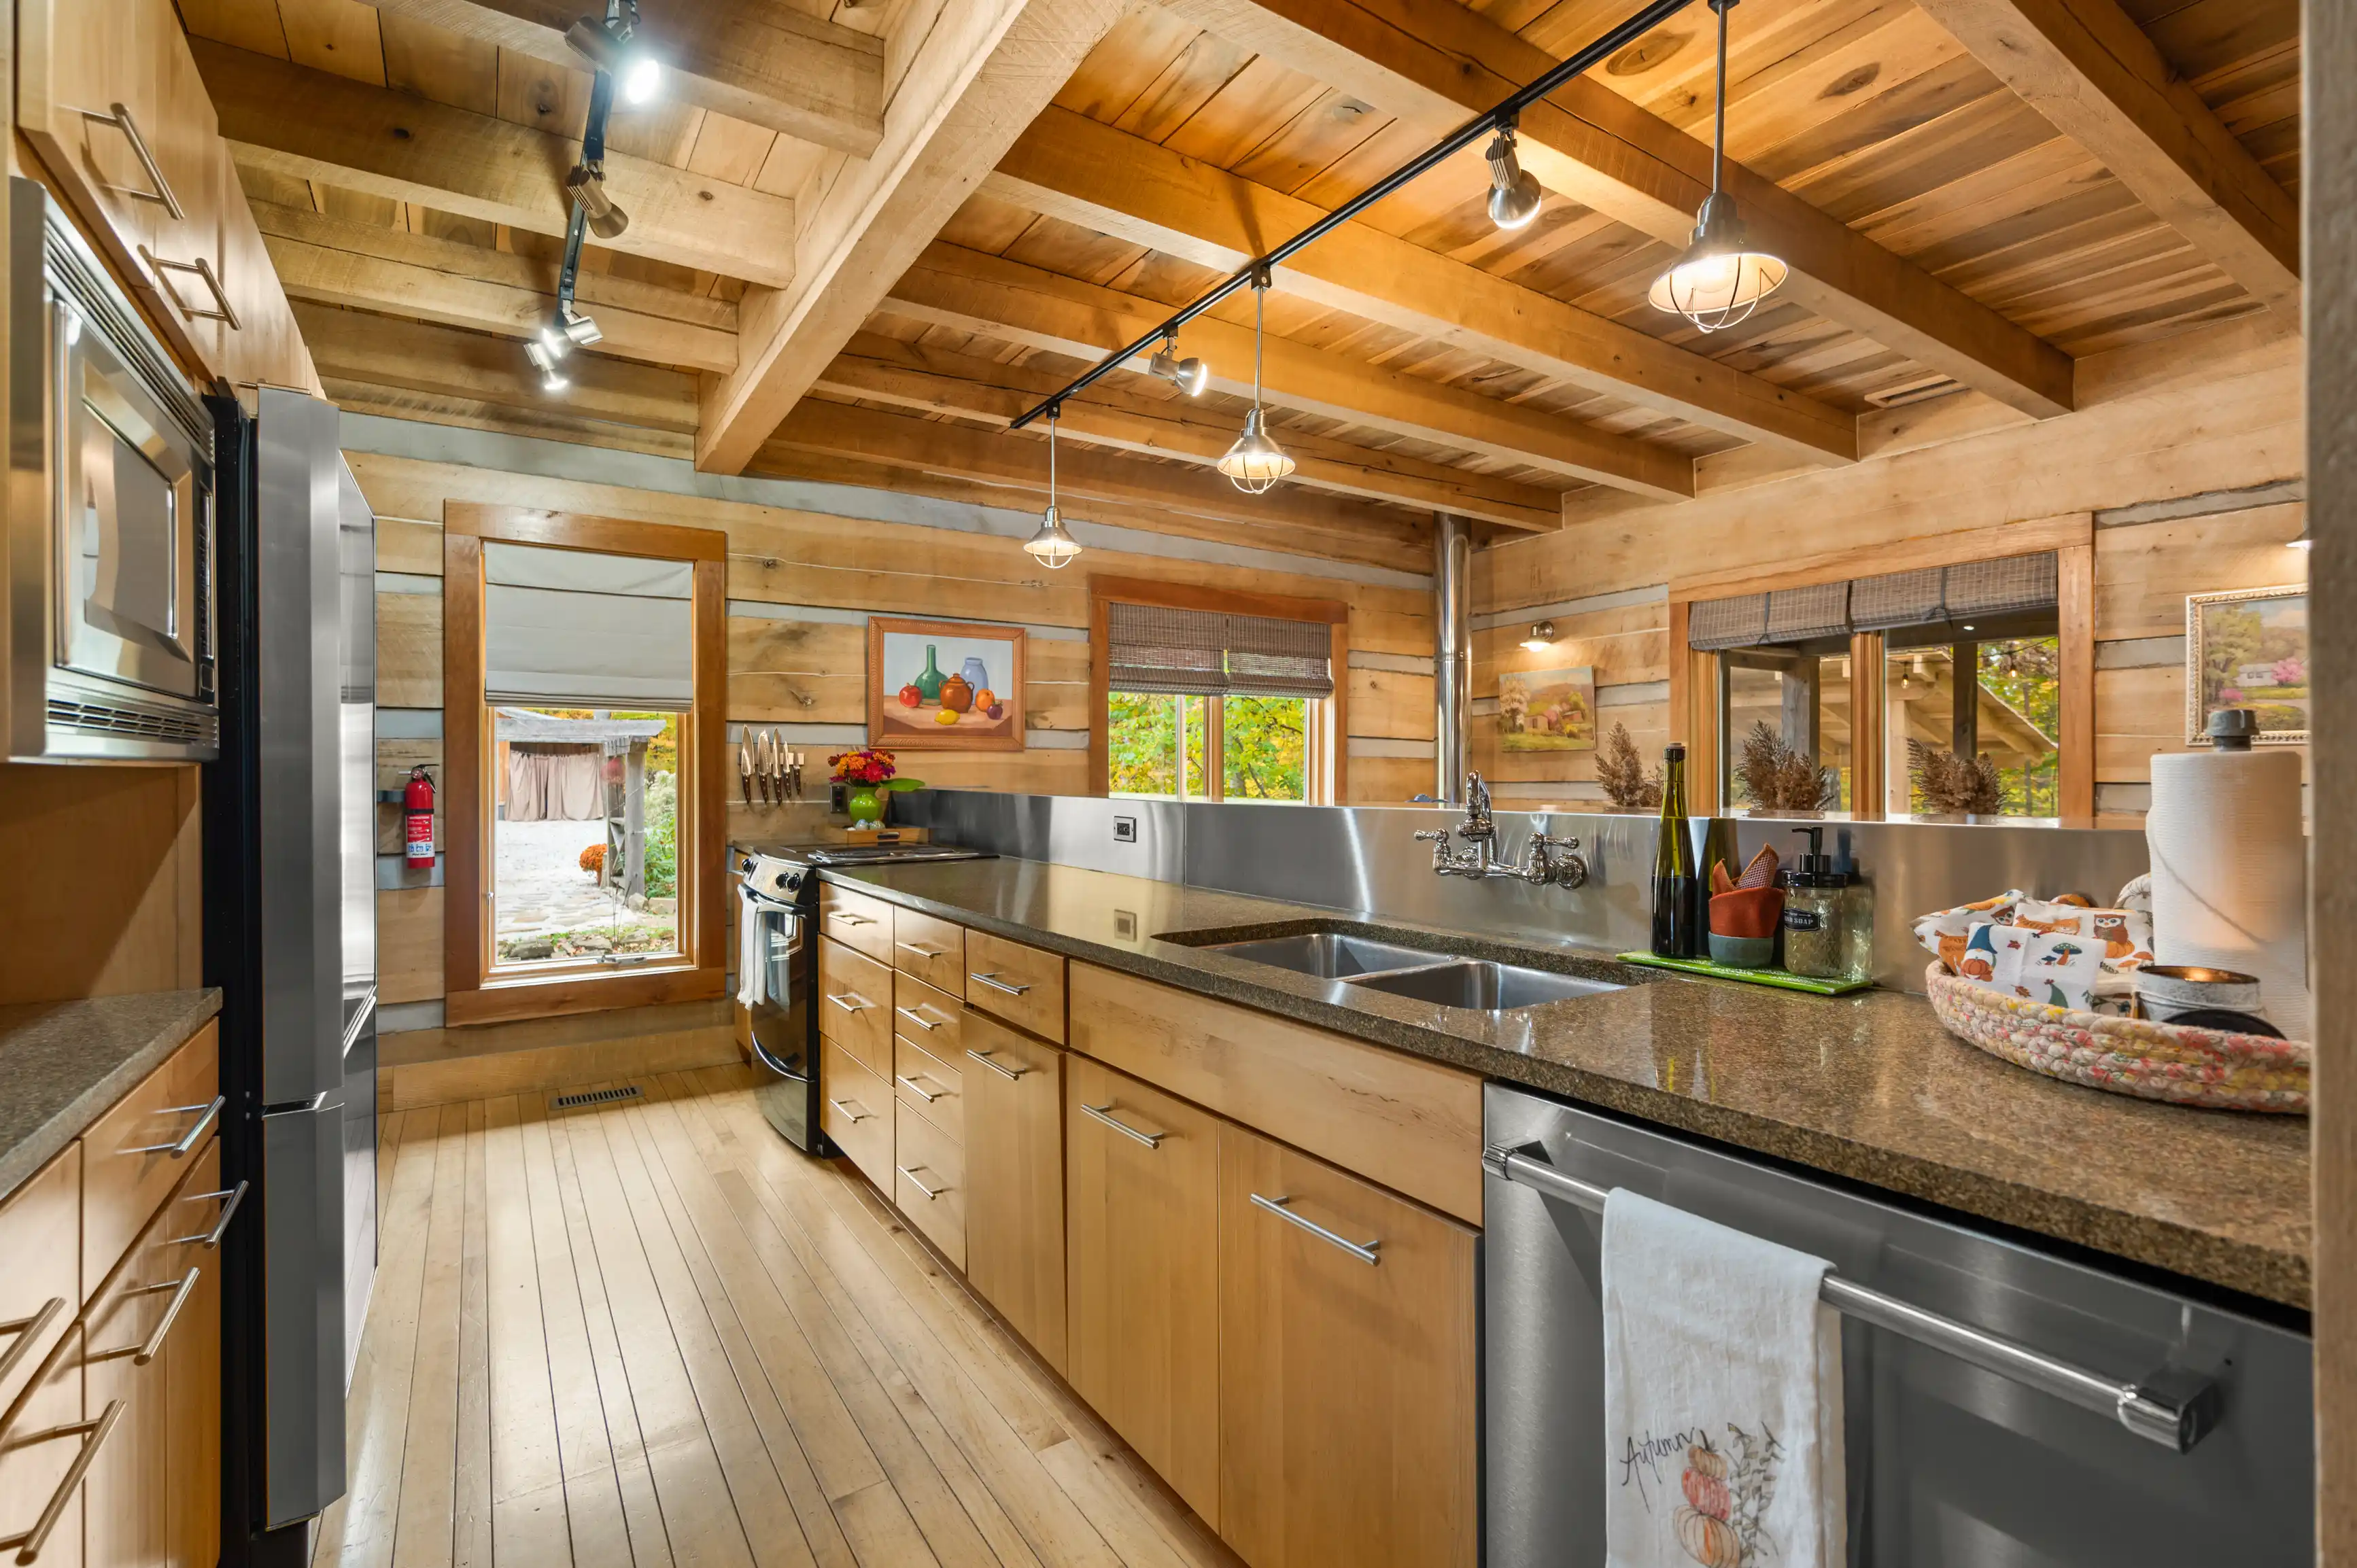 Spacious rustic kitchen interior with wooden beams, cabinetry, stainless steel appliances, and a granite countertop.